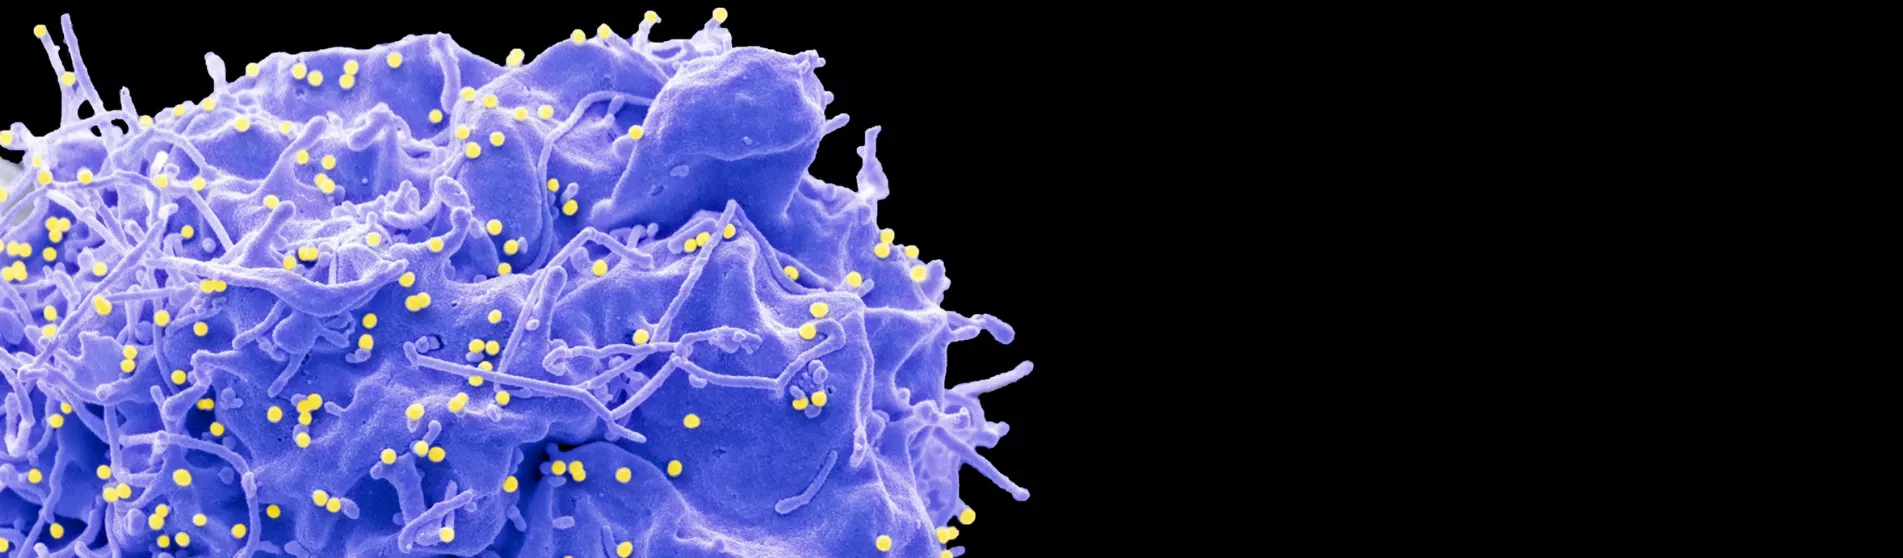 HIV infected cell electron micrograph 1903x558